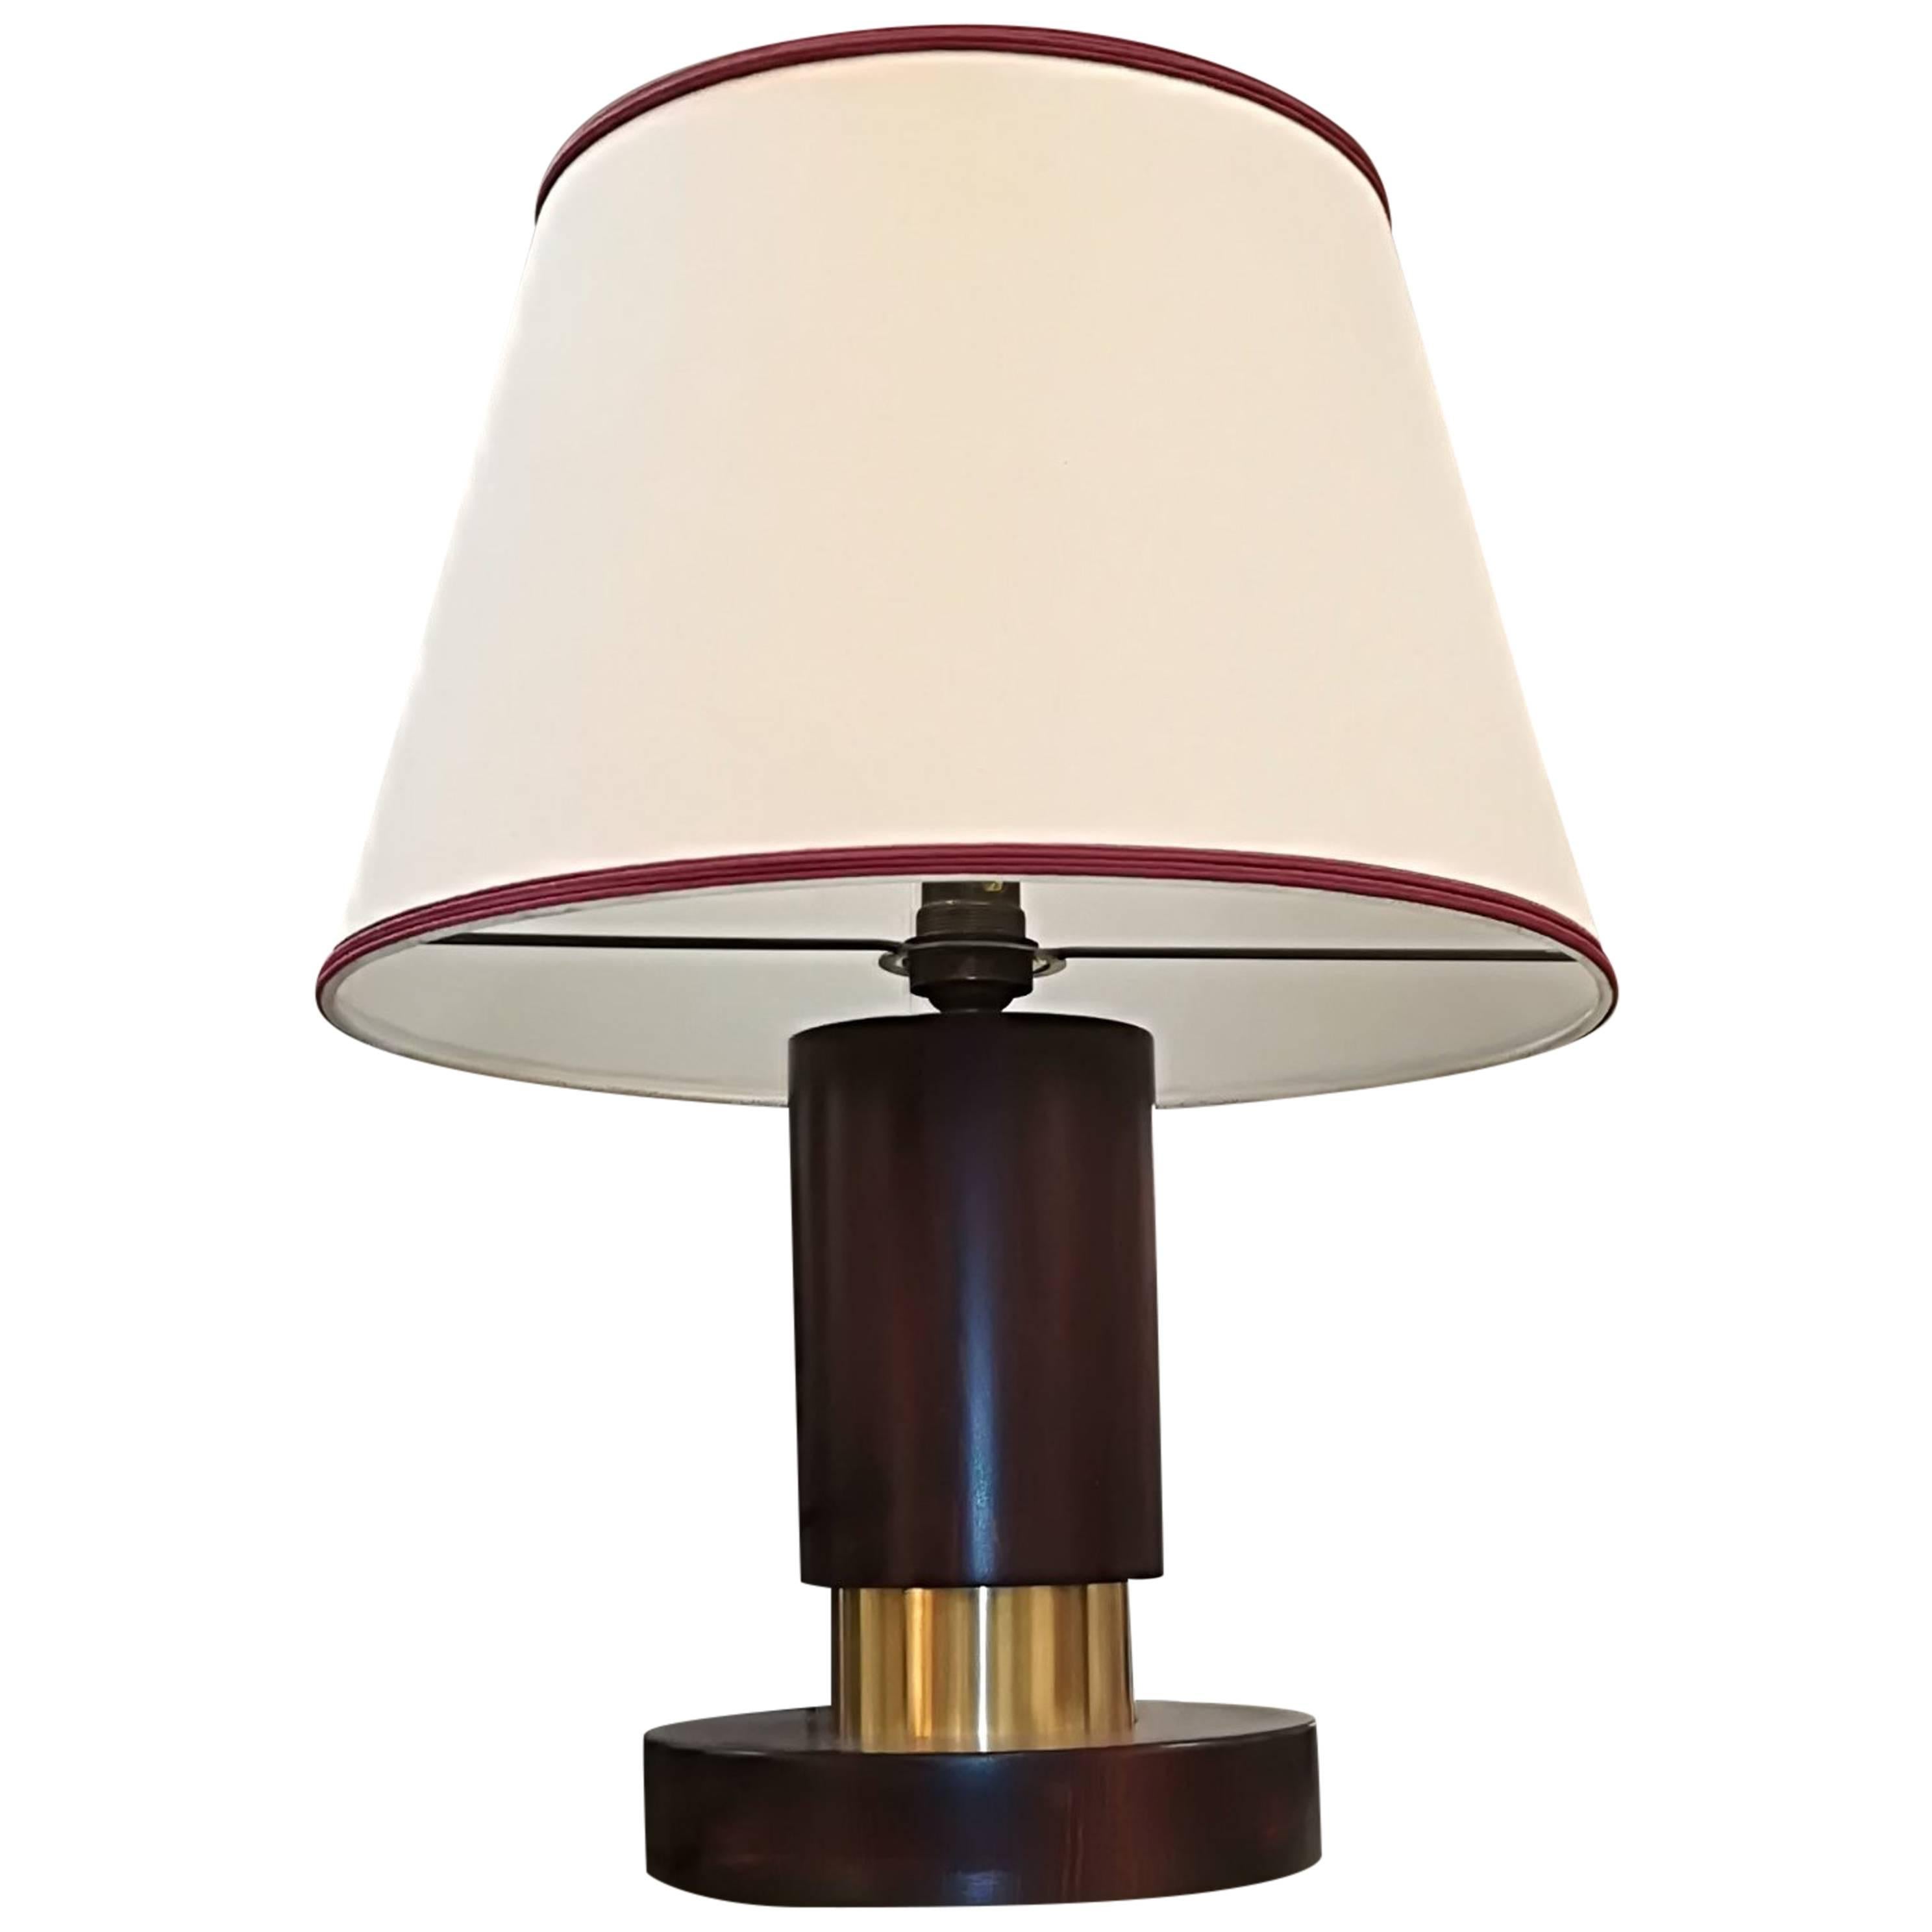 Art Deco Wood and Brass Table Lamp, circa 1930